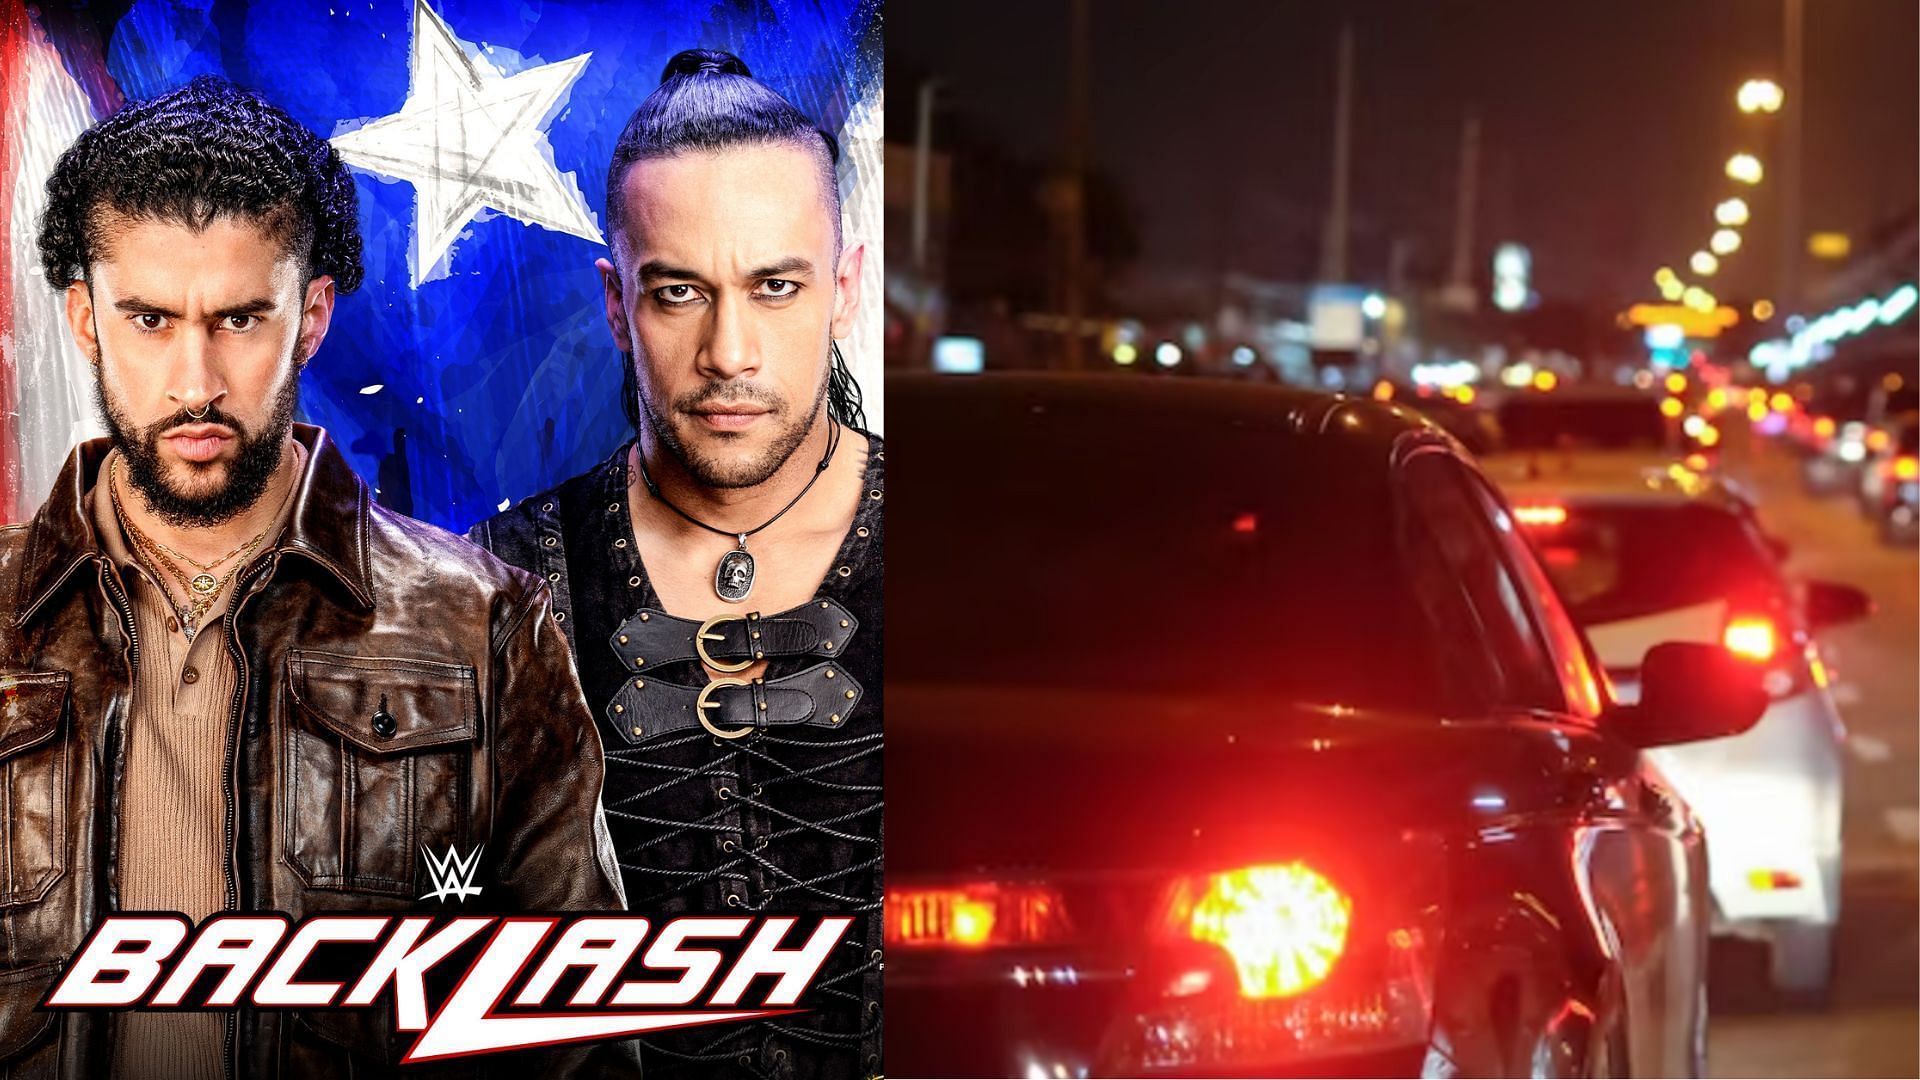 WWE Backlash aired last night in Puerto Rico.